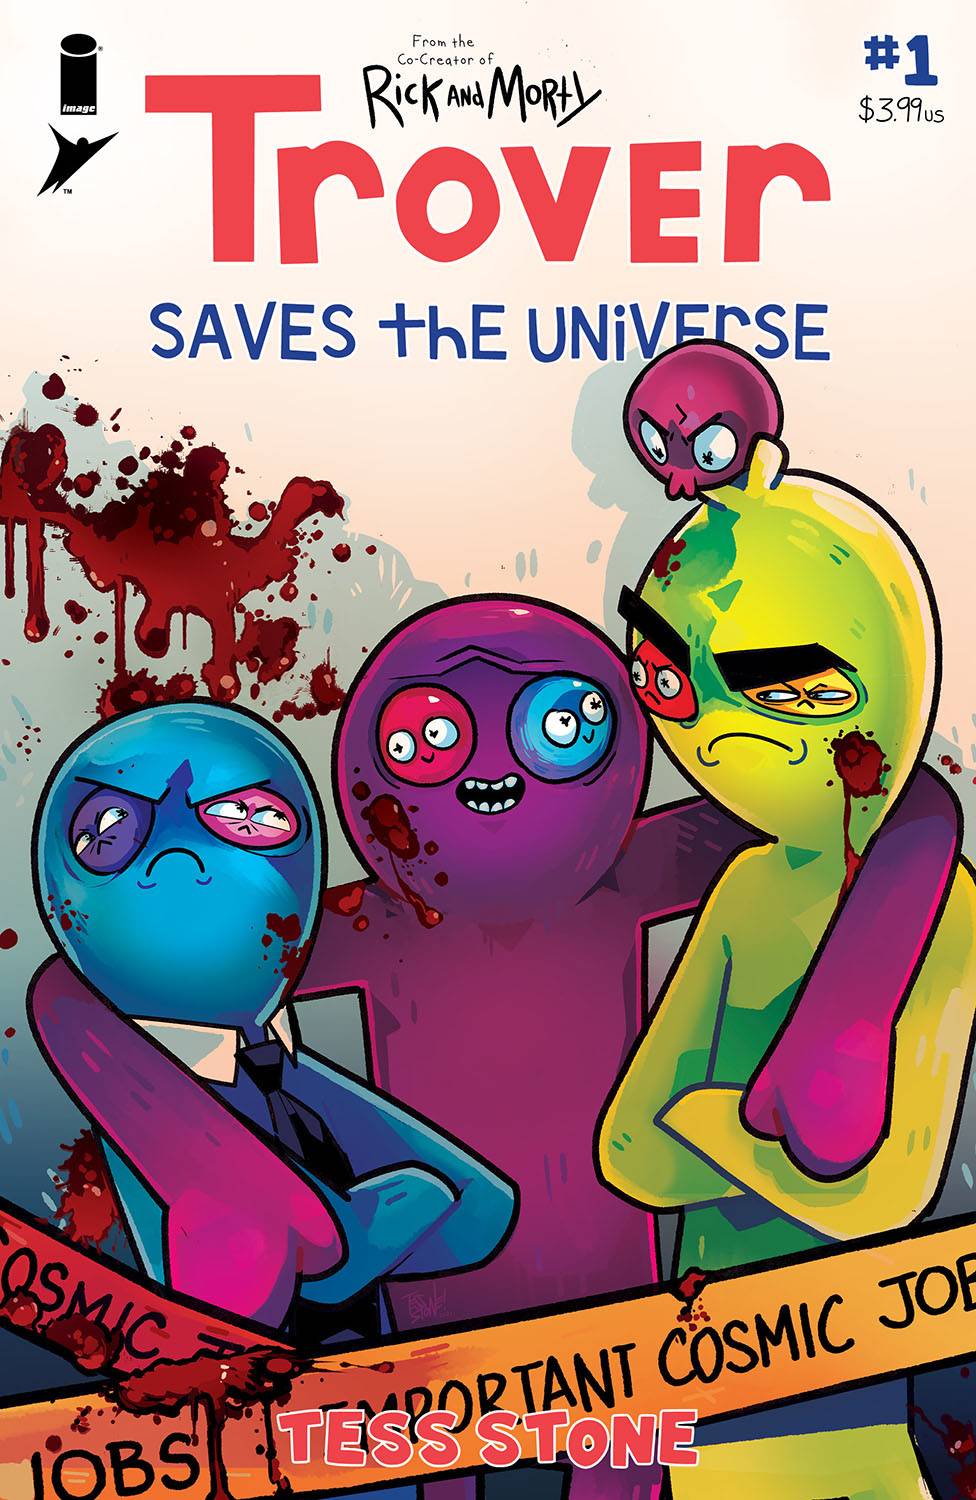 TROVER SAVES THE UNIVERSE #1 (OF 5) CVR A STONE (MR)